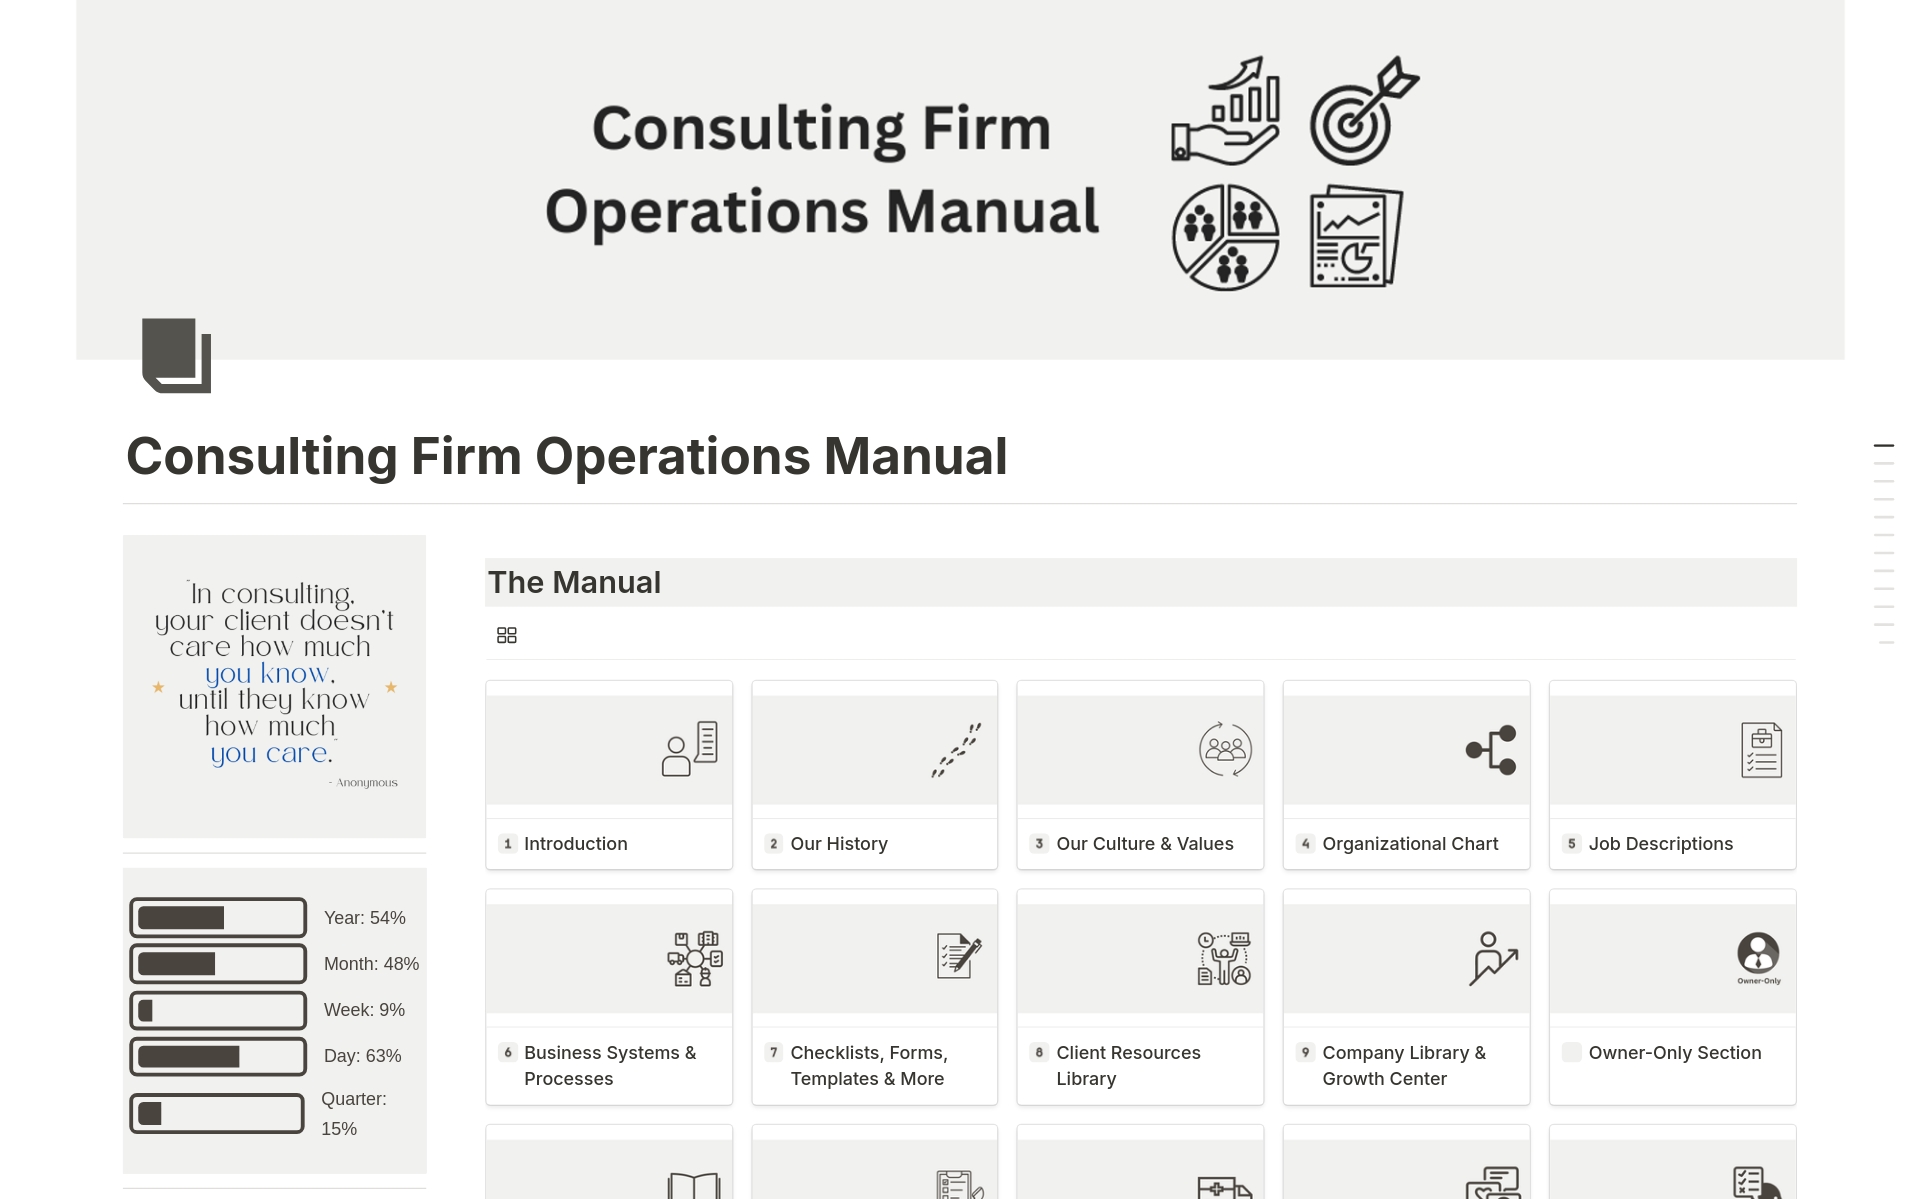 Streamline your consulting business’s operations with an Operations Manual created specifically for busy consultants. Inspired by the book “The E-myth” and packed with 60+ pre-built sections, it's your 'business playbook" including your SOPs, workflows, guidelines, and more.